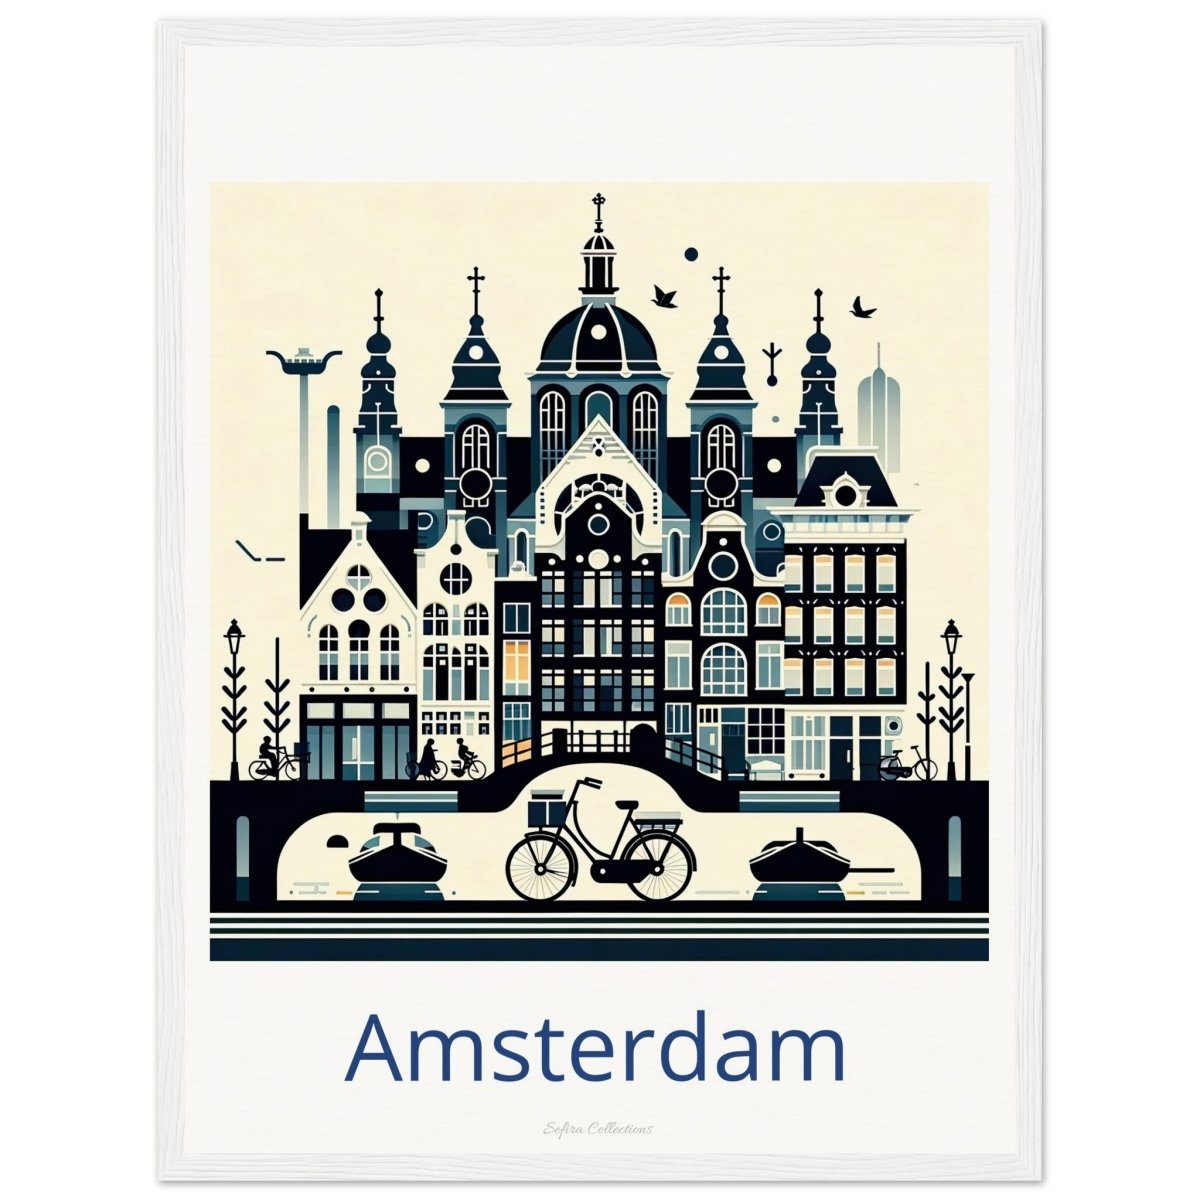 Sefira Amsterdam Art Travel Museum-Quality Matte Paper Wooden Framed Poster | Sefira Art Gallery - Print Material - Sefira Collections